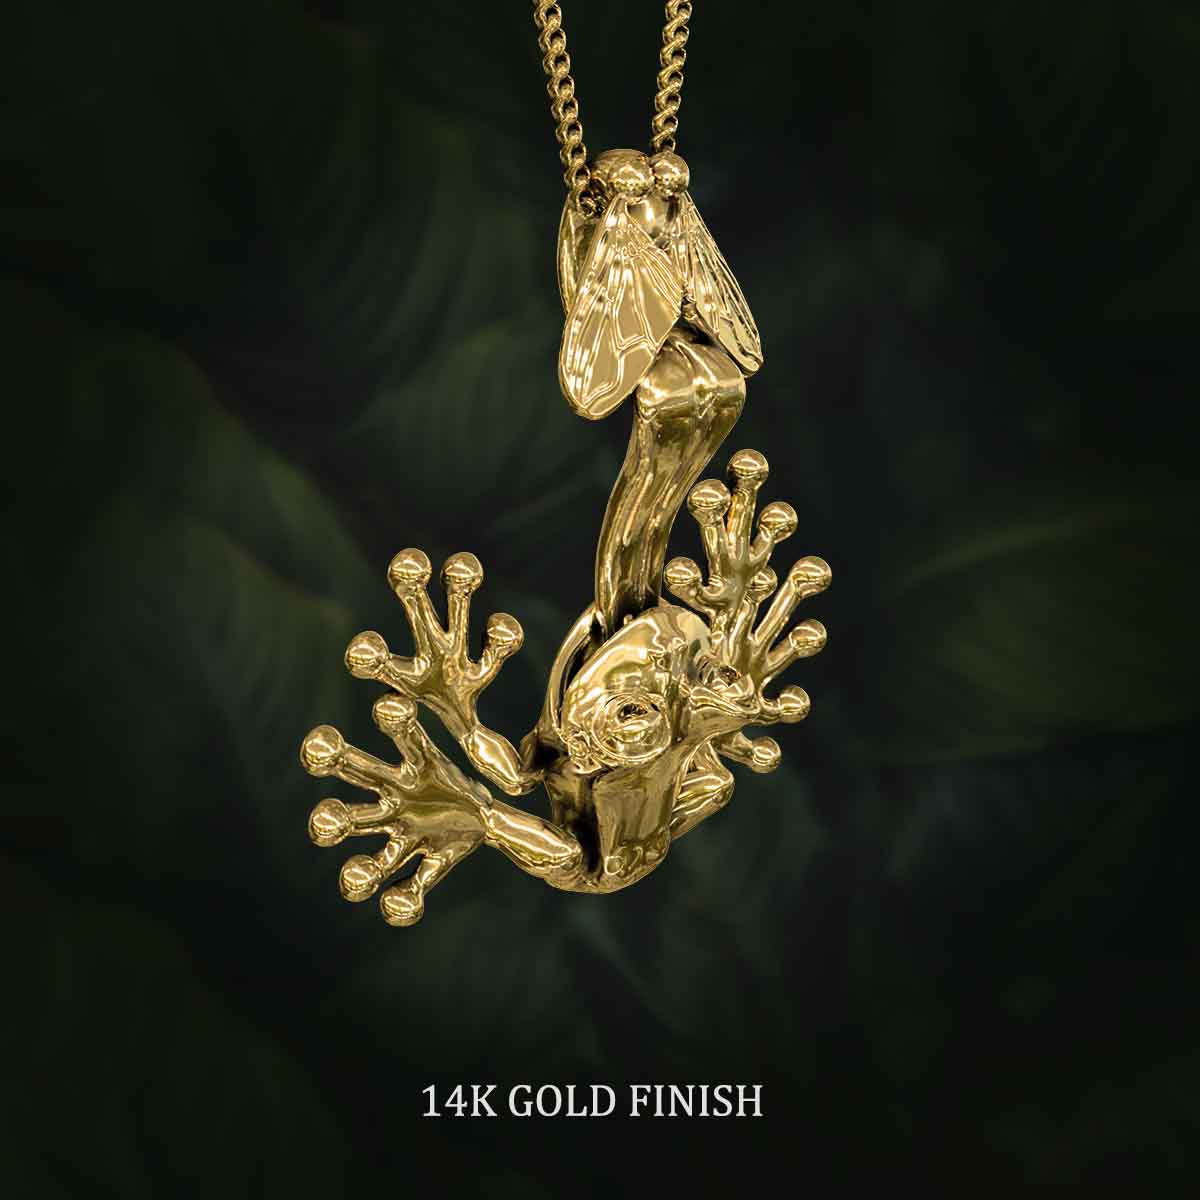 14K-Gold-Finish-Frog-Catching-Fly-With-Tongue-Pendant-Jewelry-For-Necklace